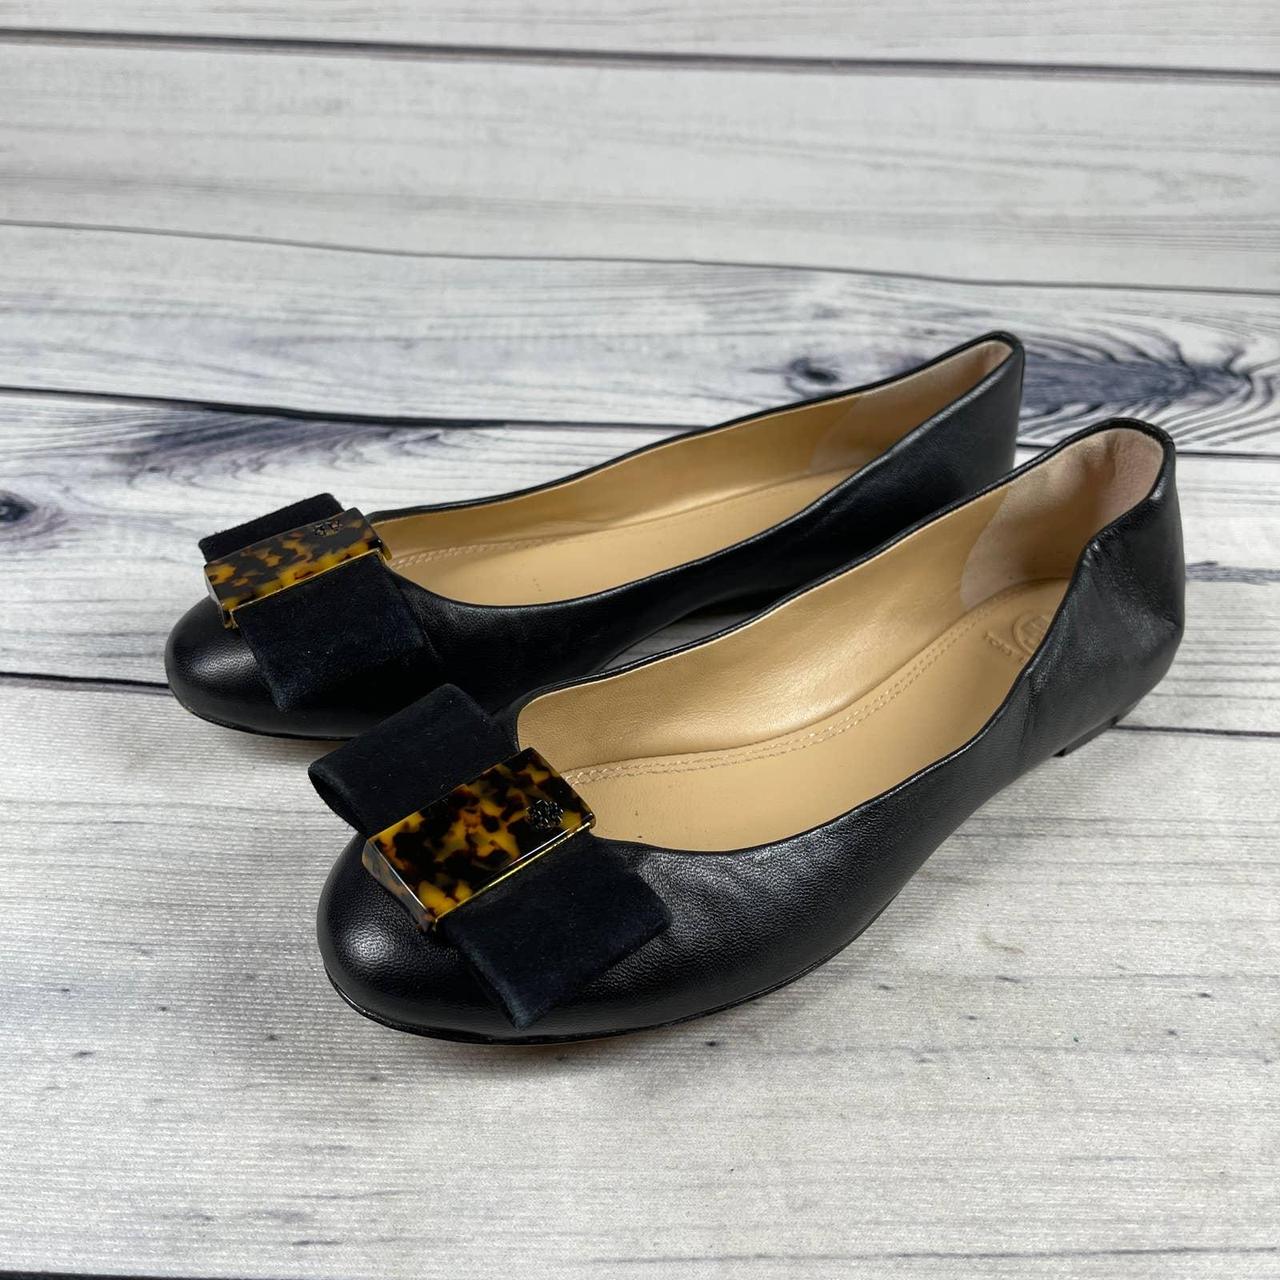 Tory Burch Women's Black and Brown Ballet-shoes | Depop